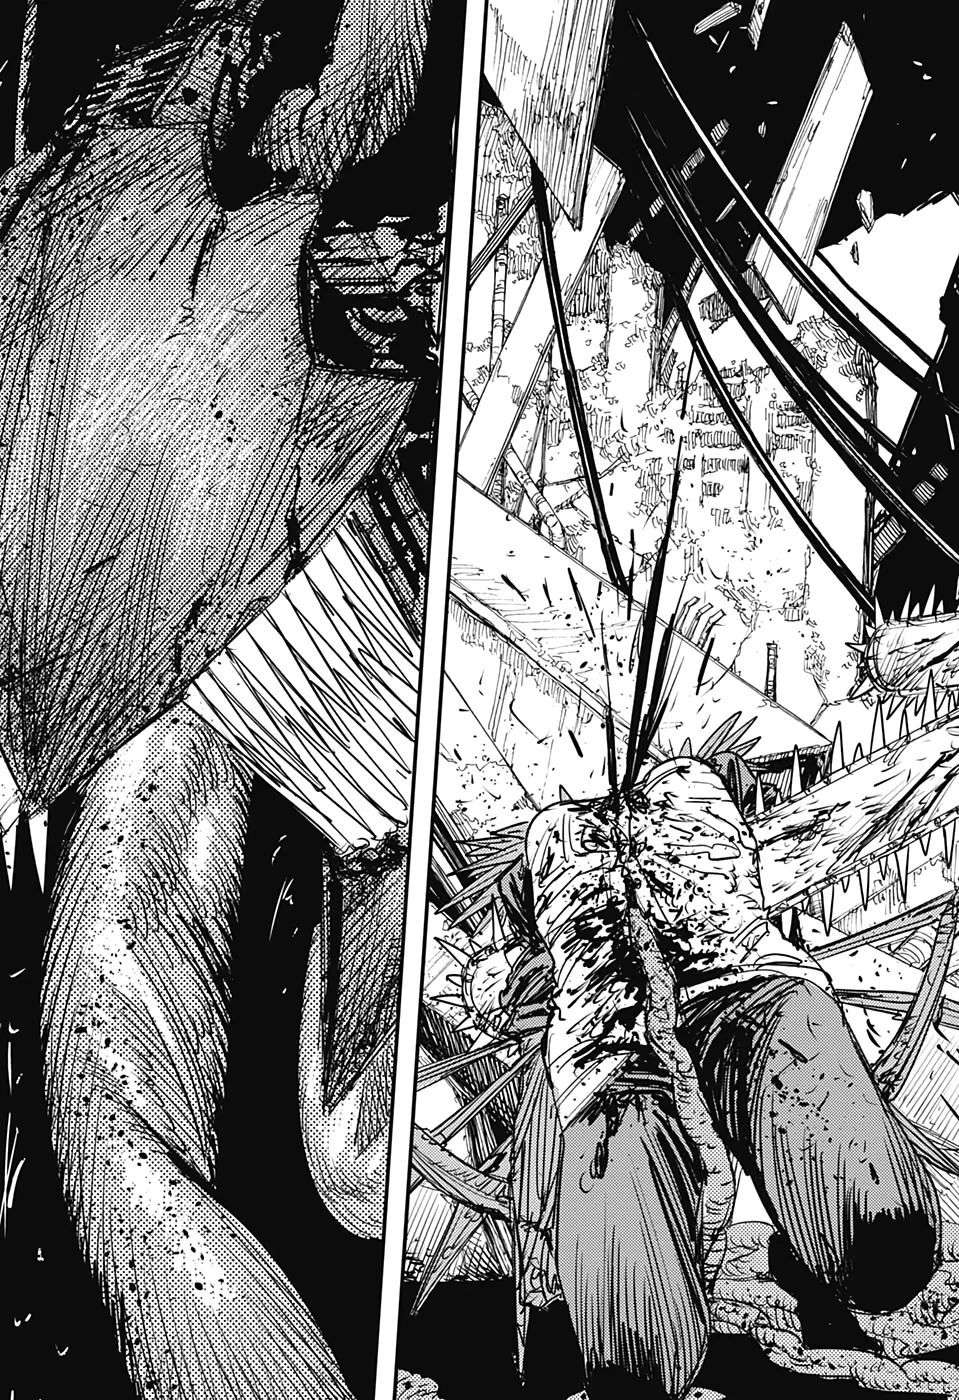 Chainsaw Man Chapter 87 Bahasa Indonesia